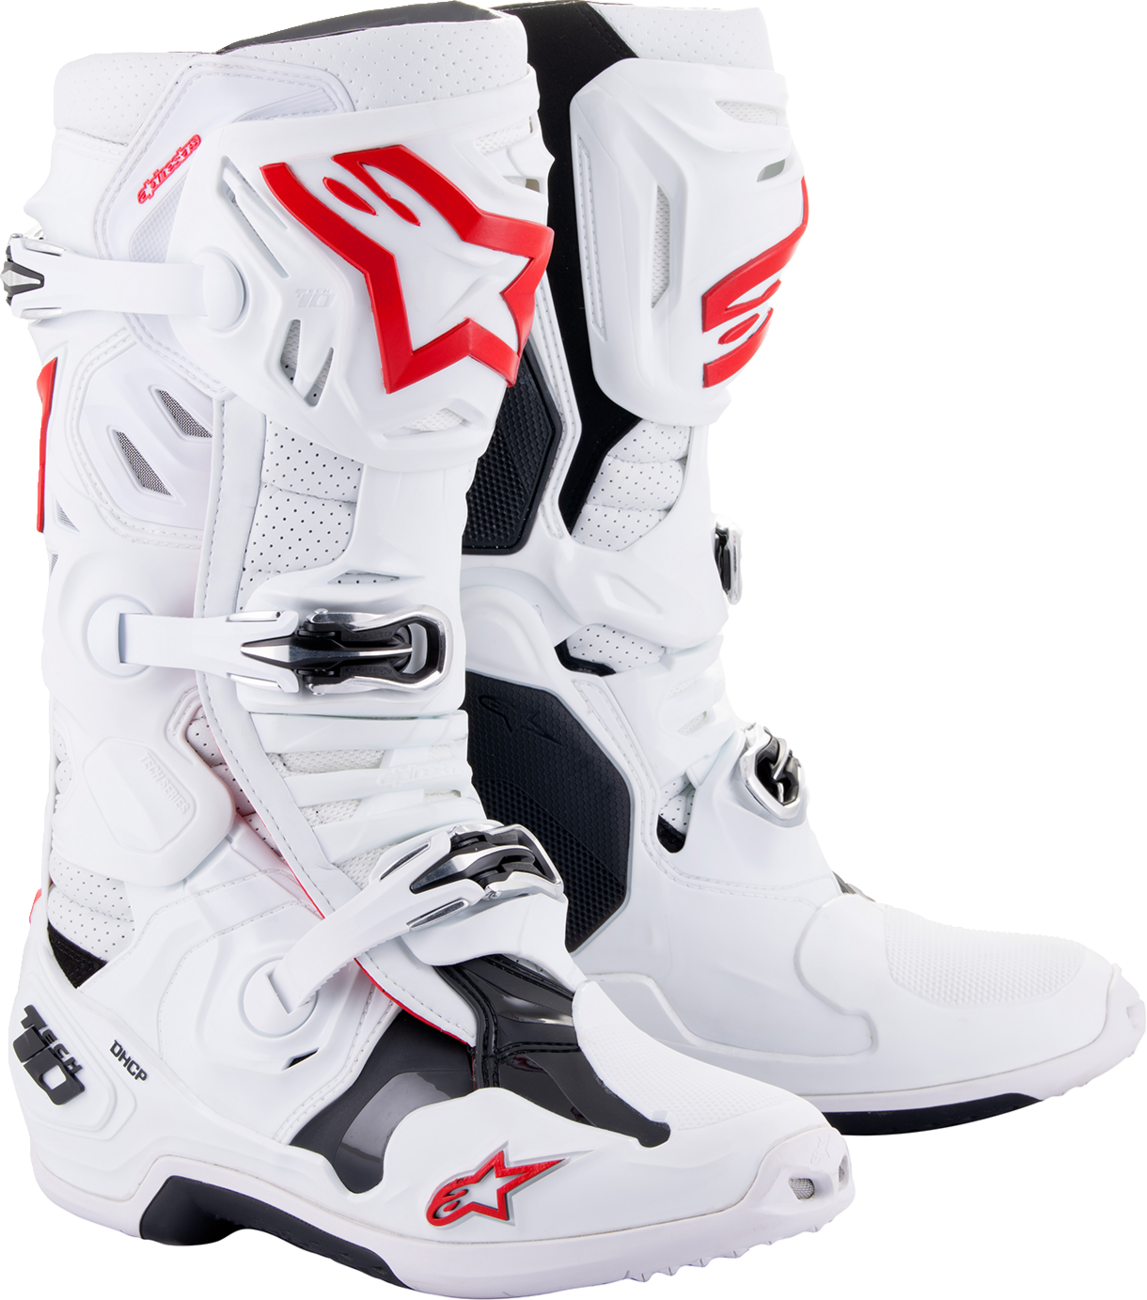 ALPINESTARS Tech 10 Supervented Boots - White/Red - US 11 2010520-2230-11